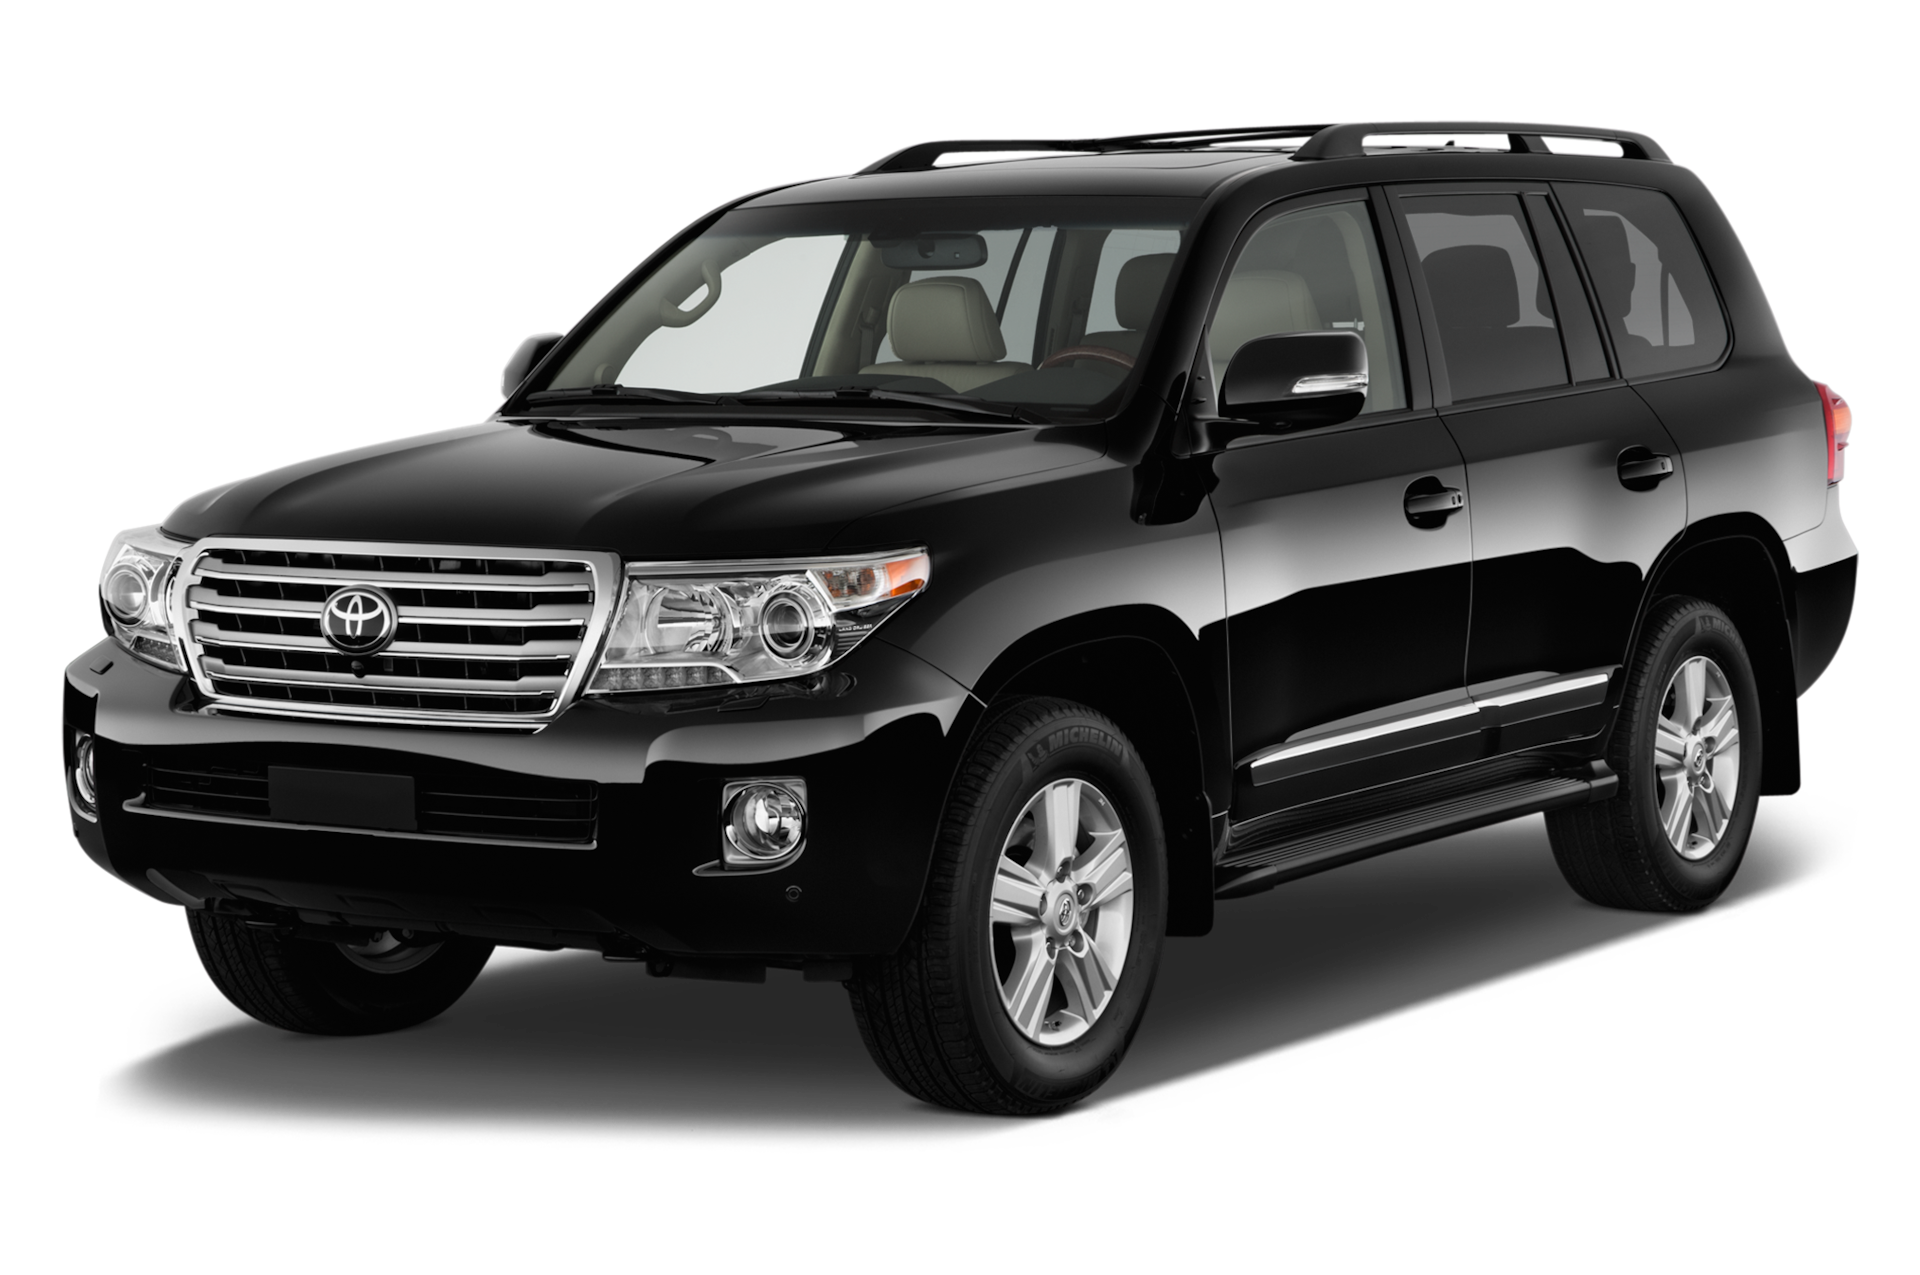 2015 Toyota Land Cruiser Prices, Reviews, and Photos - MotorTrend